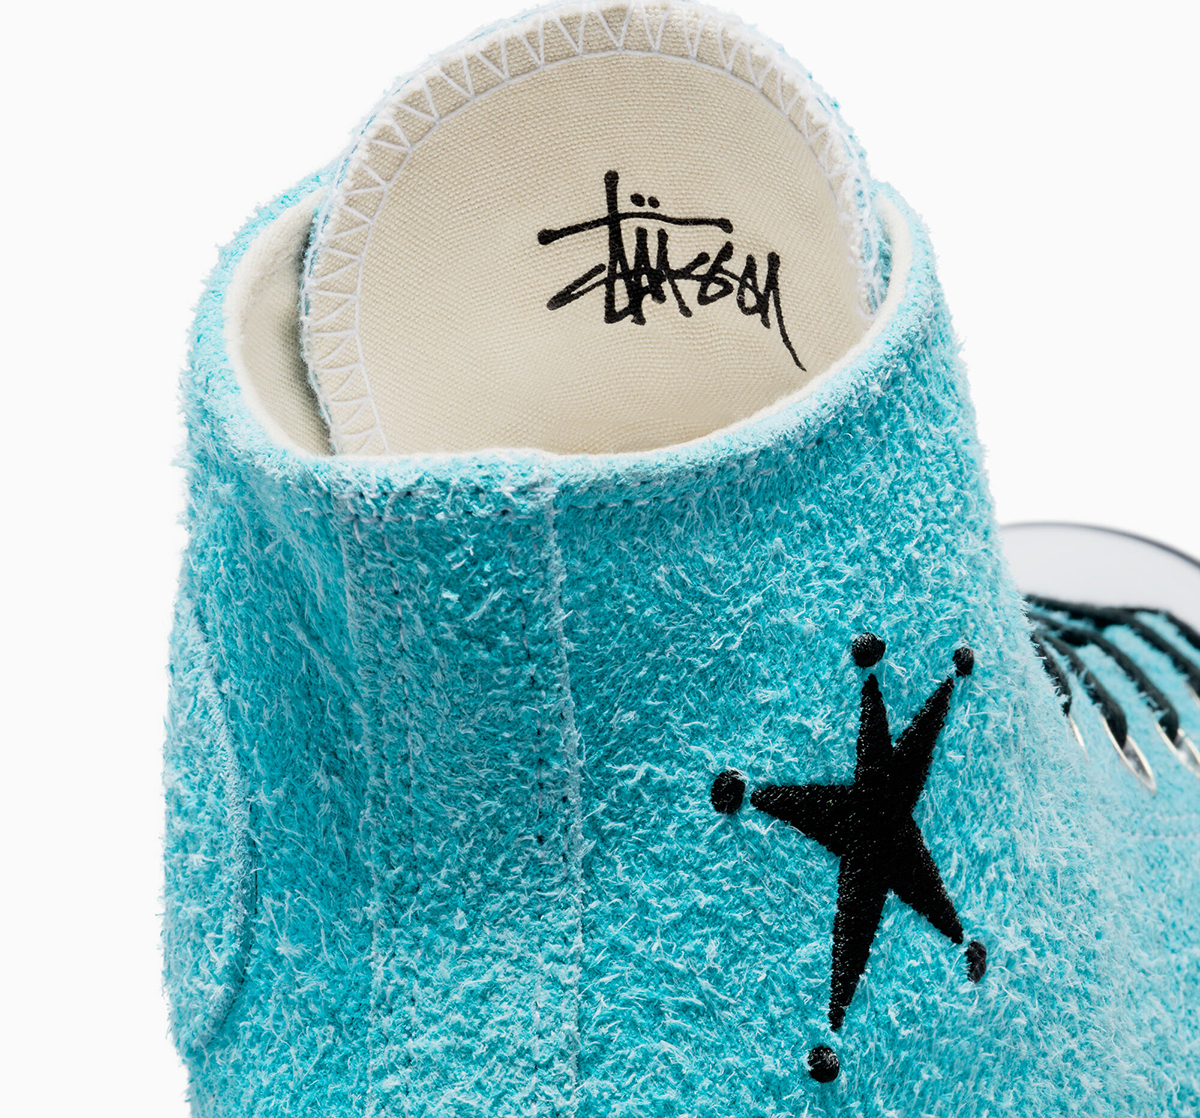 Stussy Rick Owens Has Put His Own Spin on the Converse release Sky Blue A07663c 6